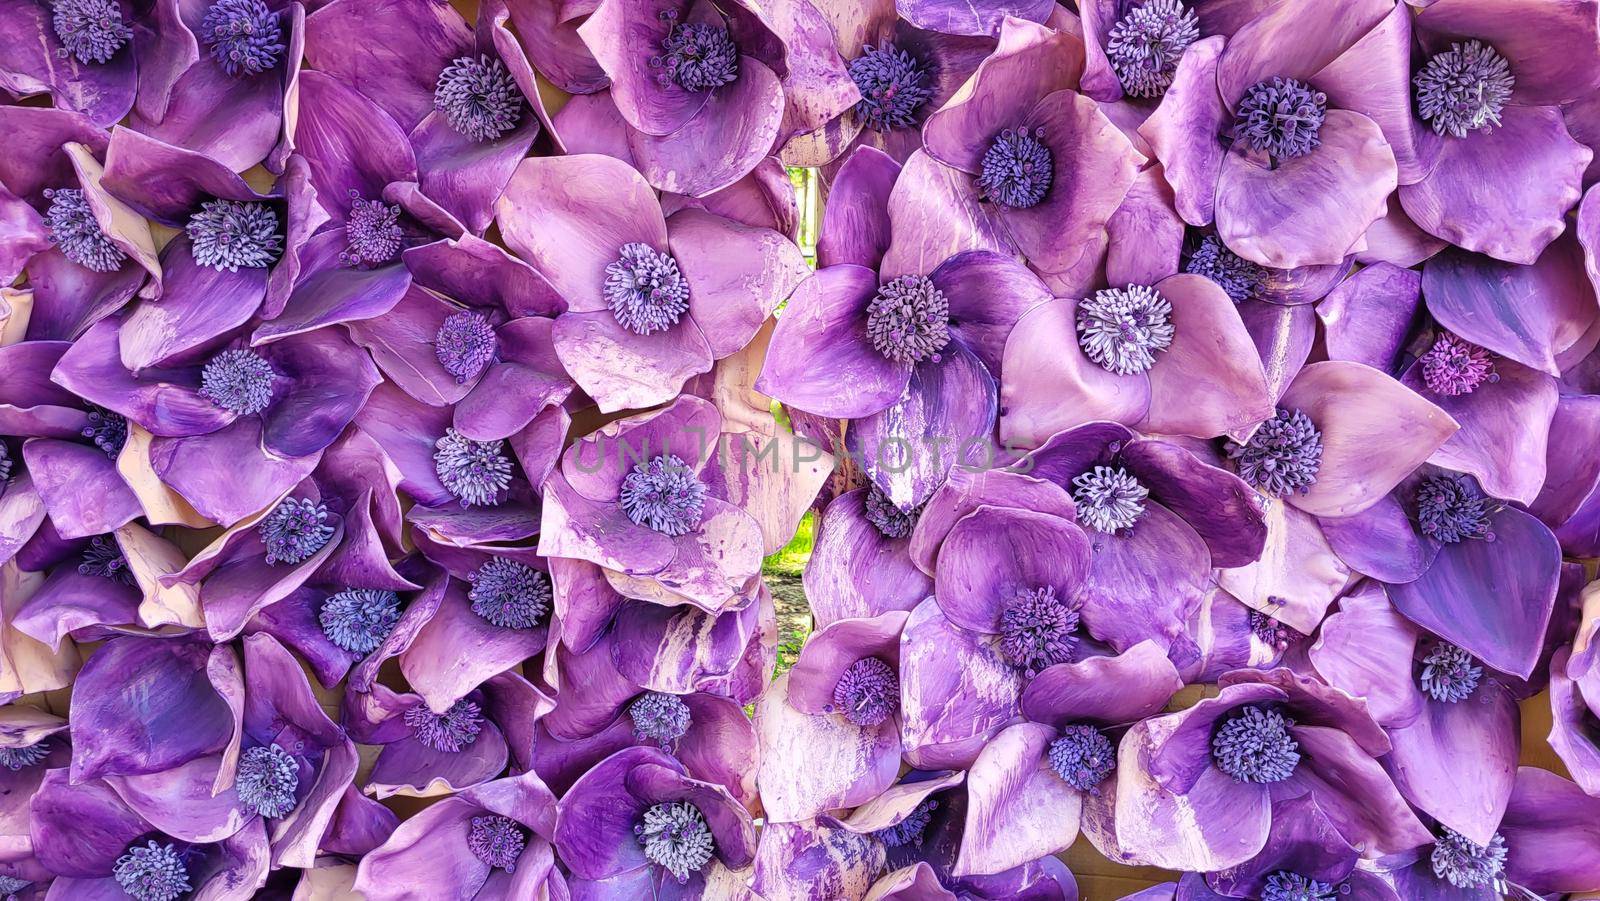 Image of artificial spring lilac-purple flowers, abstract floral background by lapushka62